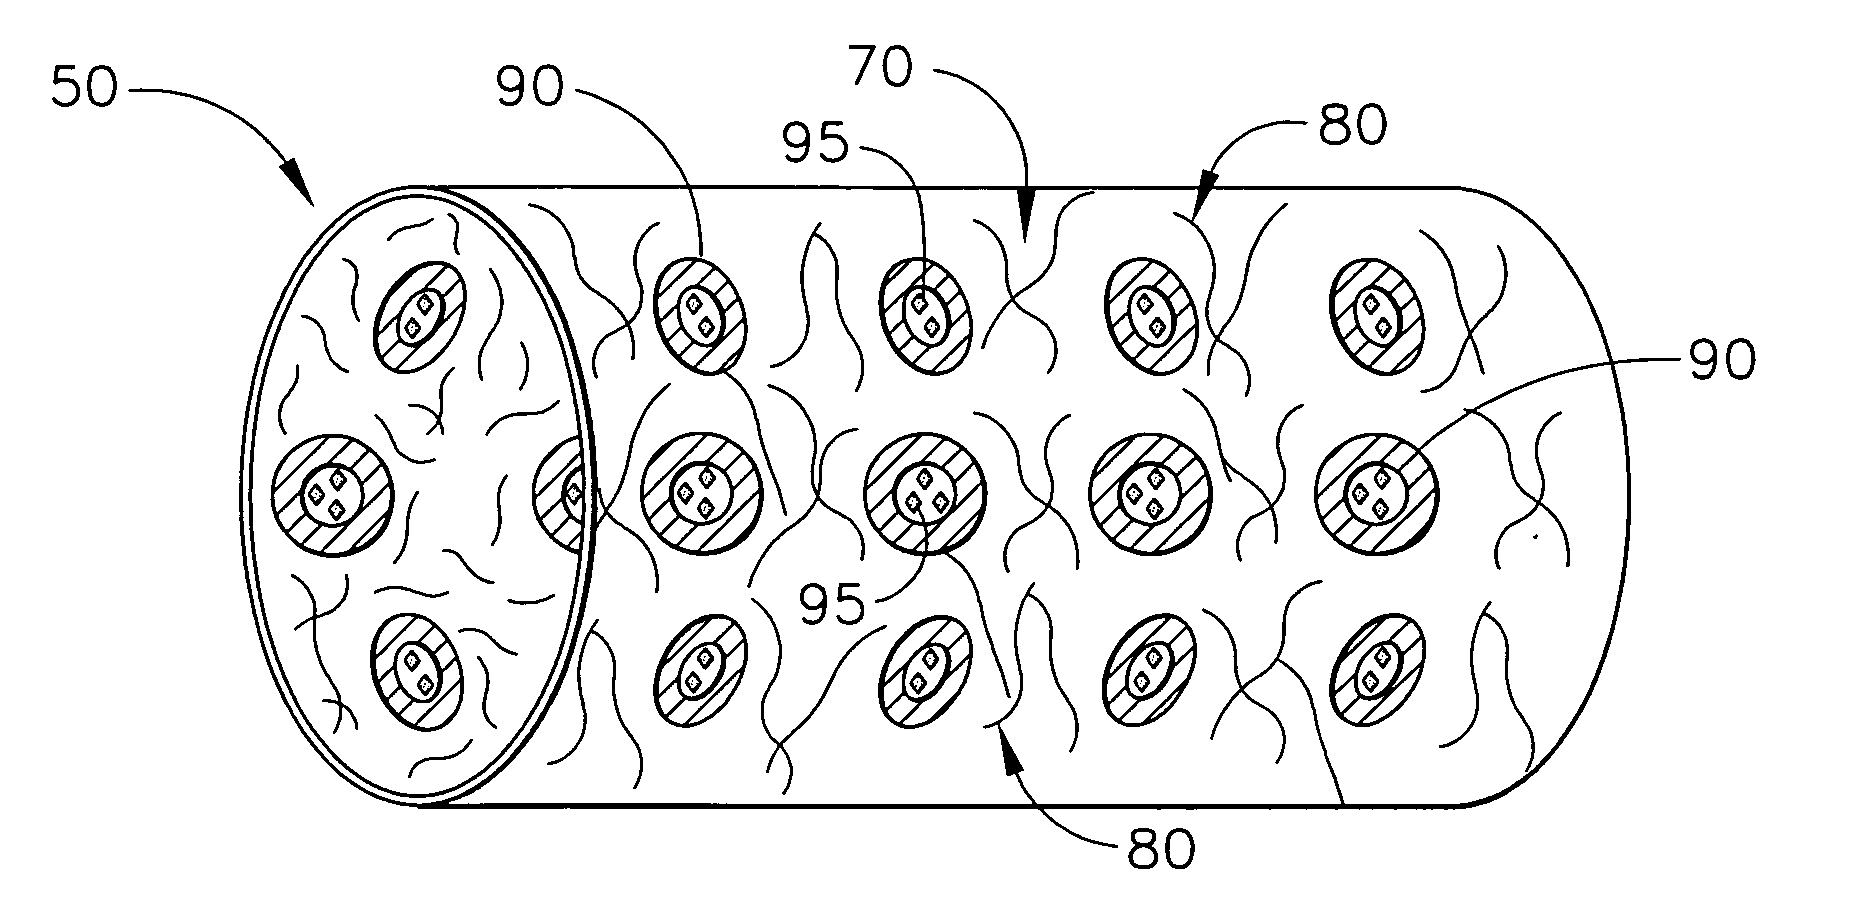 Biodegradable vascular device with buffering agent